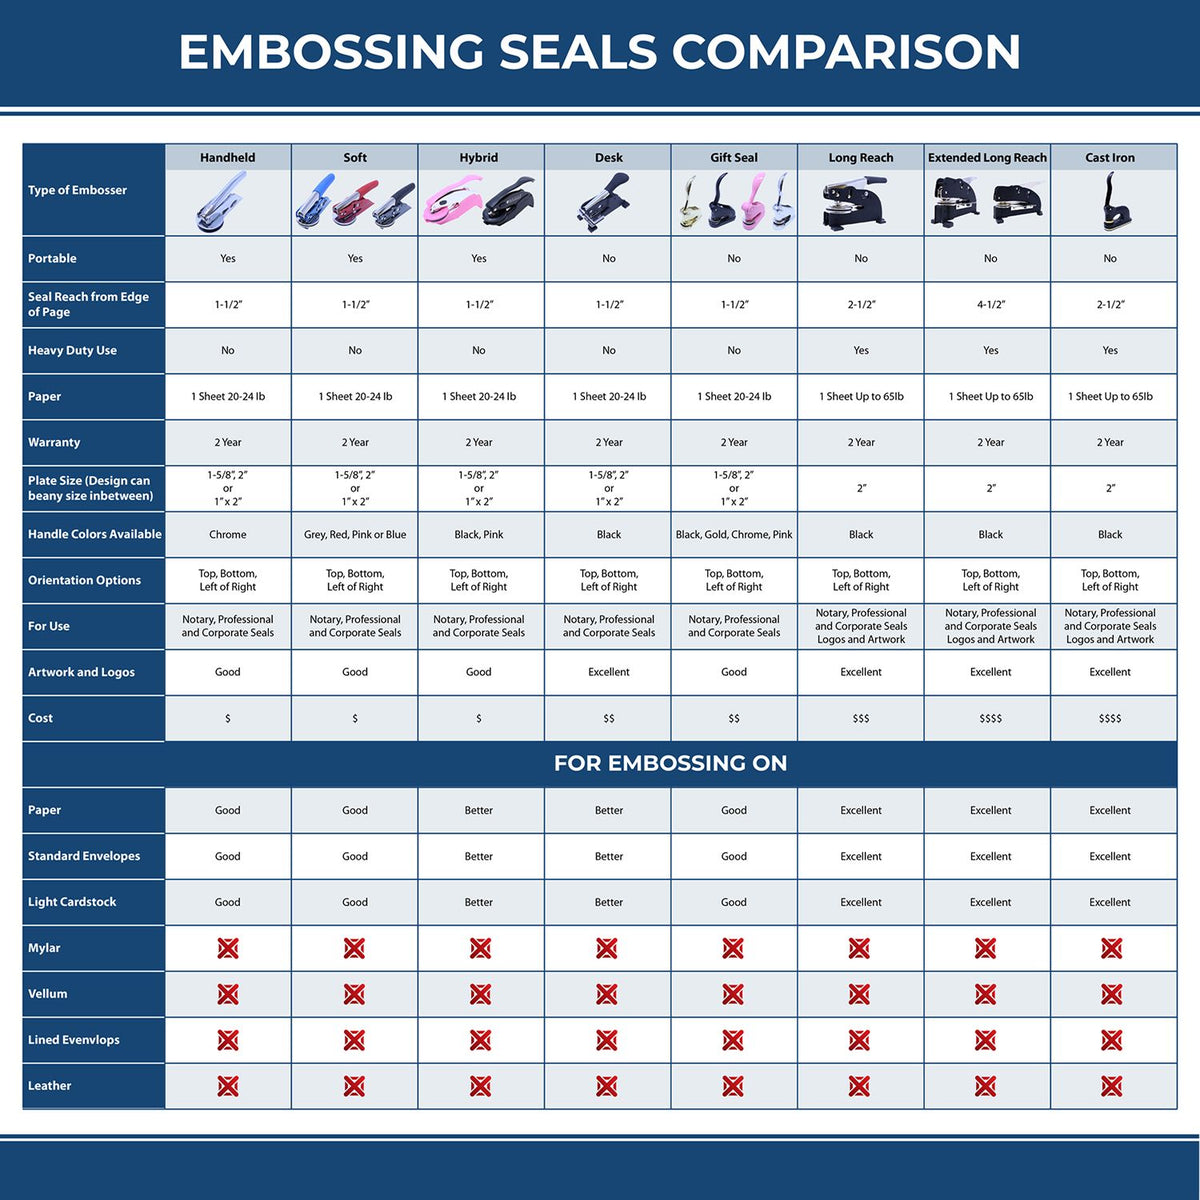 A comparison chart for the different types of mount models available for the Soft Pocket Wyoming Landscape Architect Embosser.